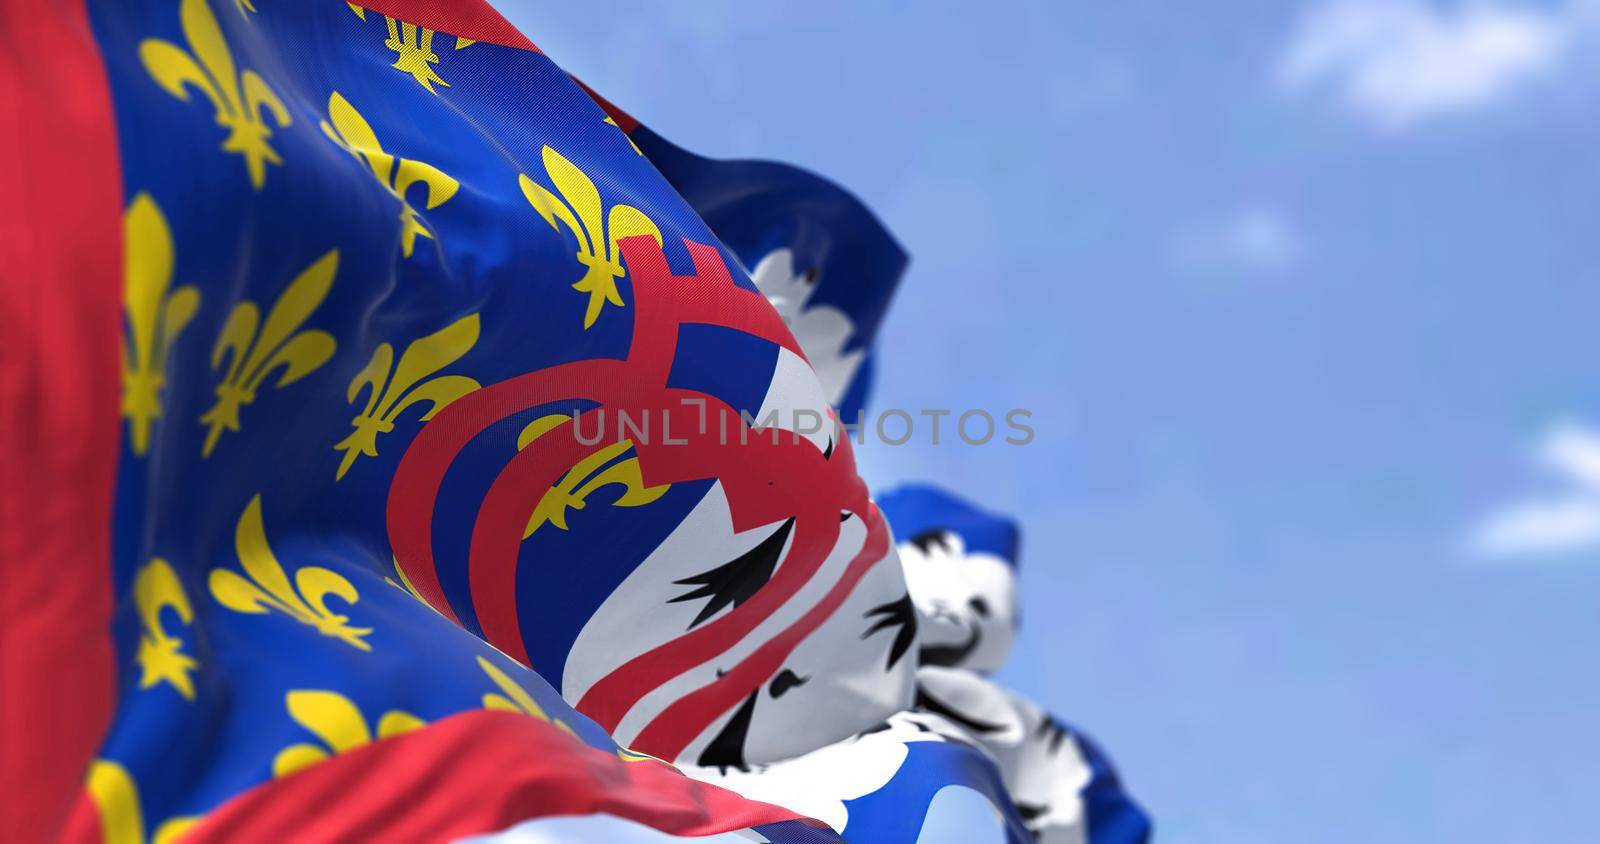 The flag of Pays de la Loire French region waving in the wind on a clear day. Pays de la Loire is one of the 18 regions of France, in the west of the mainland. French administrative region